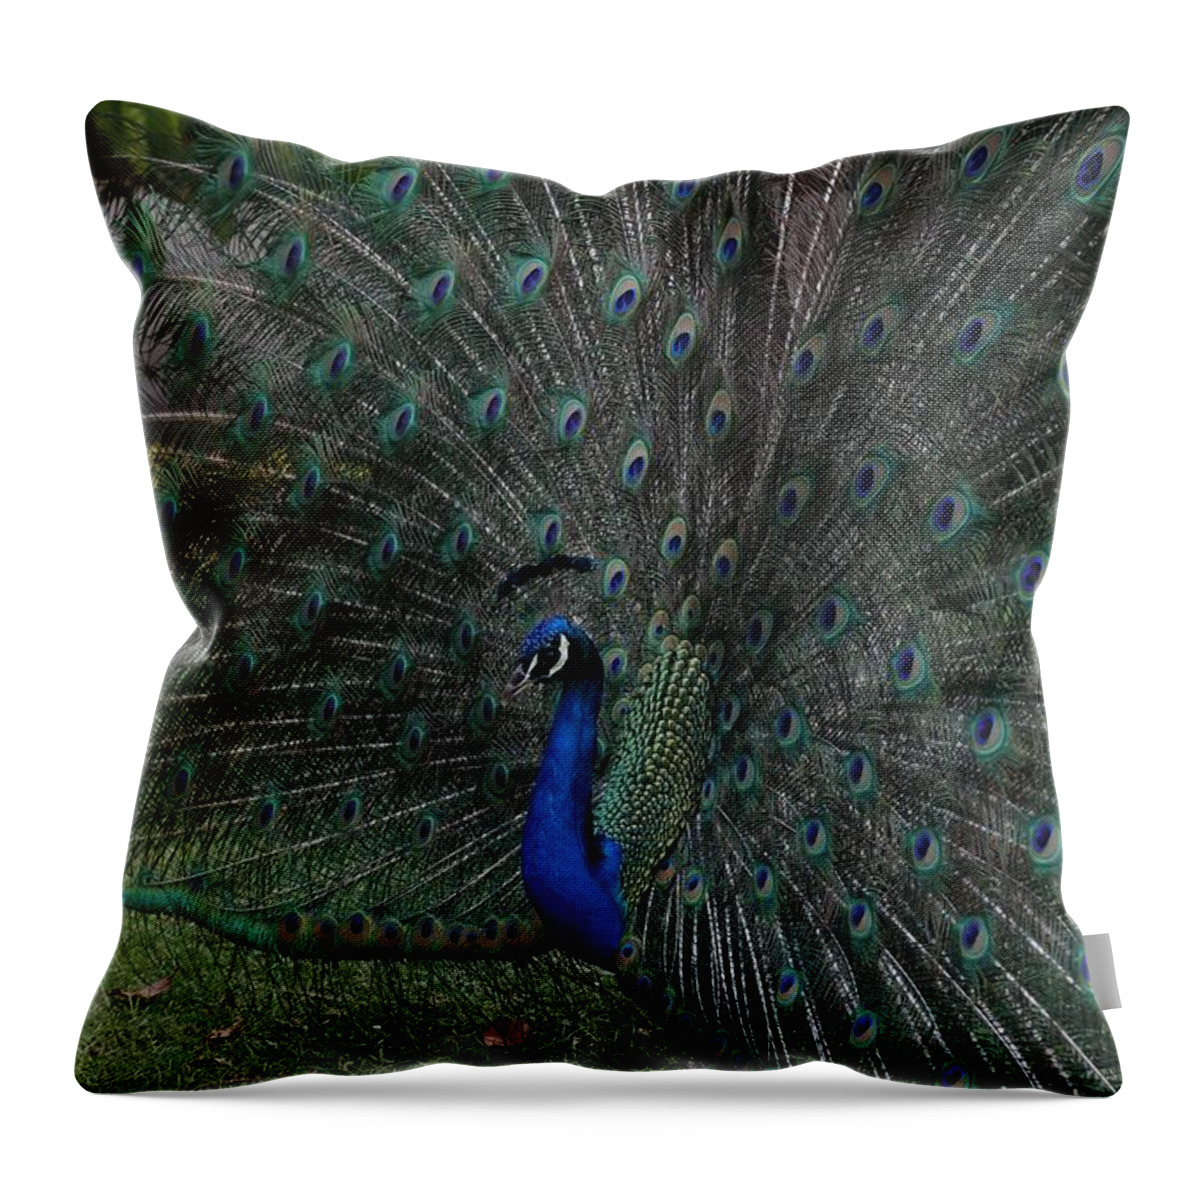 Indian Peafowl Throw Pillow featuring the photograph Peacock Fanning Tail by Mingming Jiang